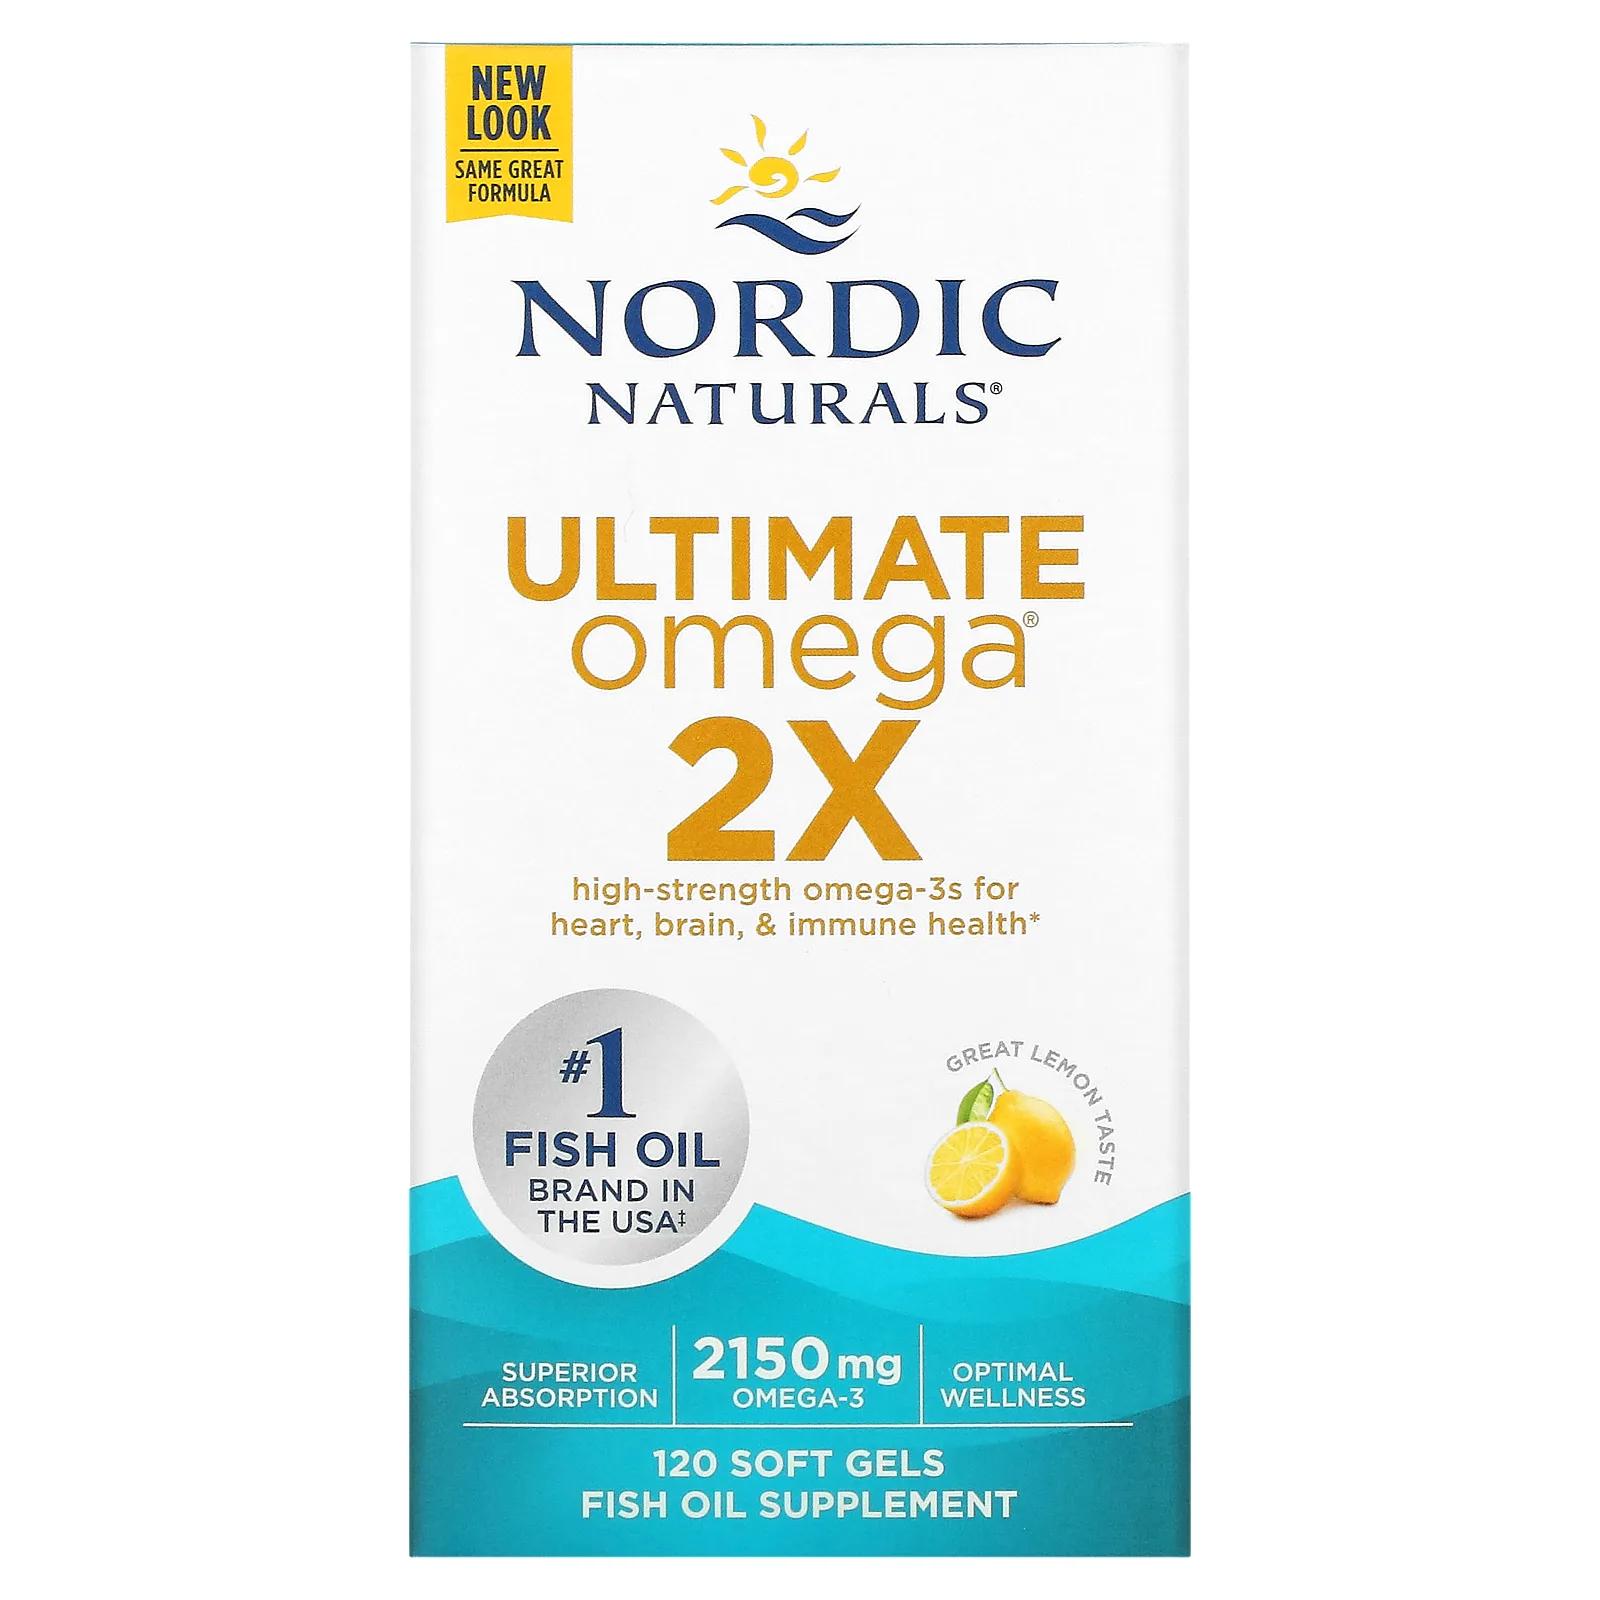 Nordic Naturals Ultimate Omega 2X 2150 мг 120 капсул nordic naturals ultimate omega 2x со вкусом лимона 1075 мг 120 капсул